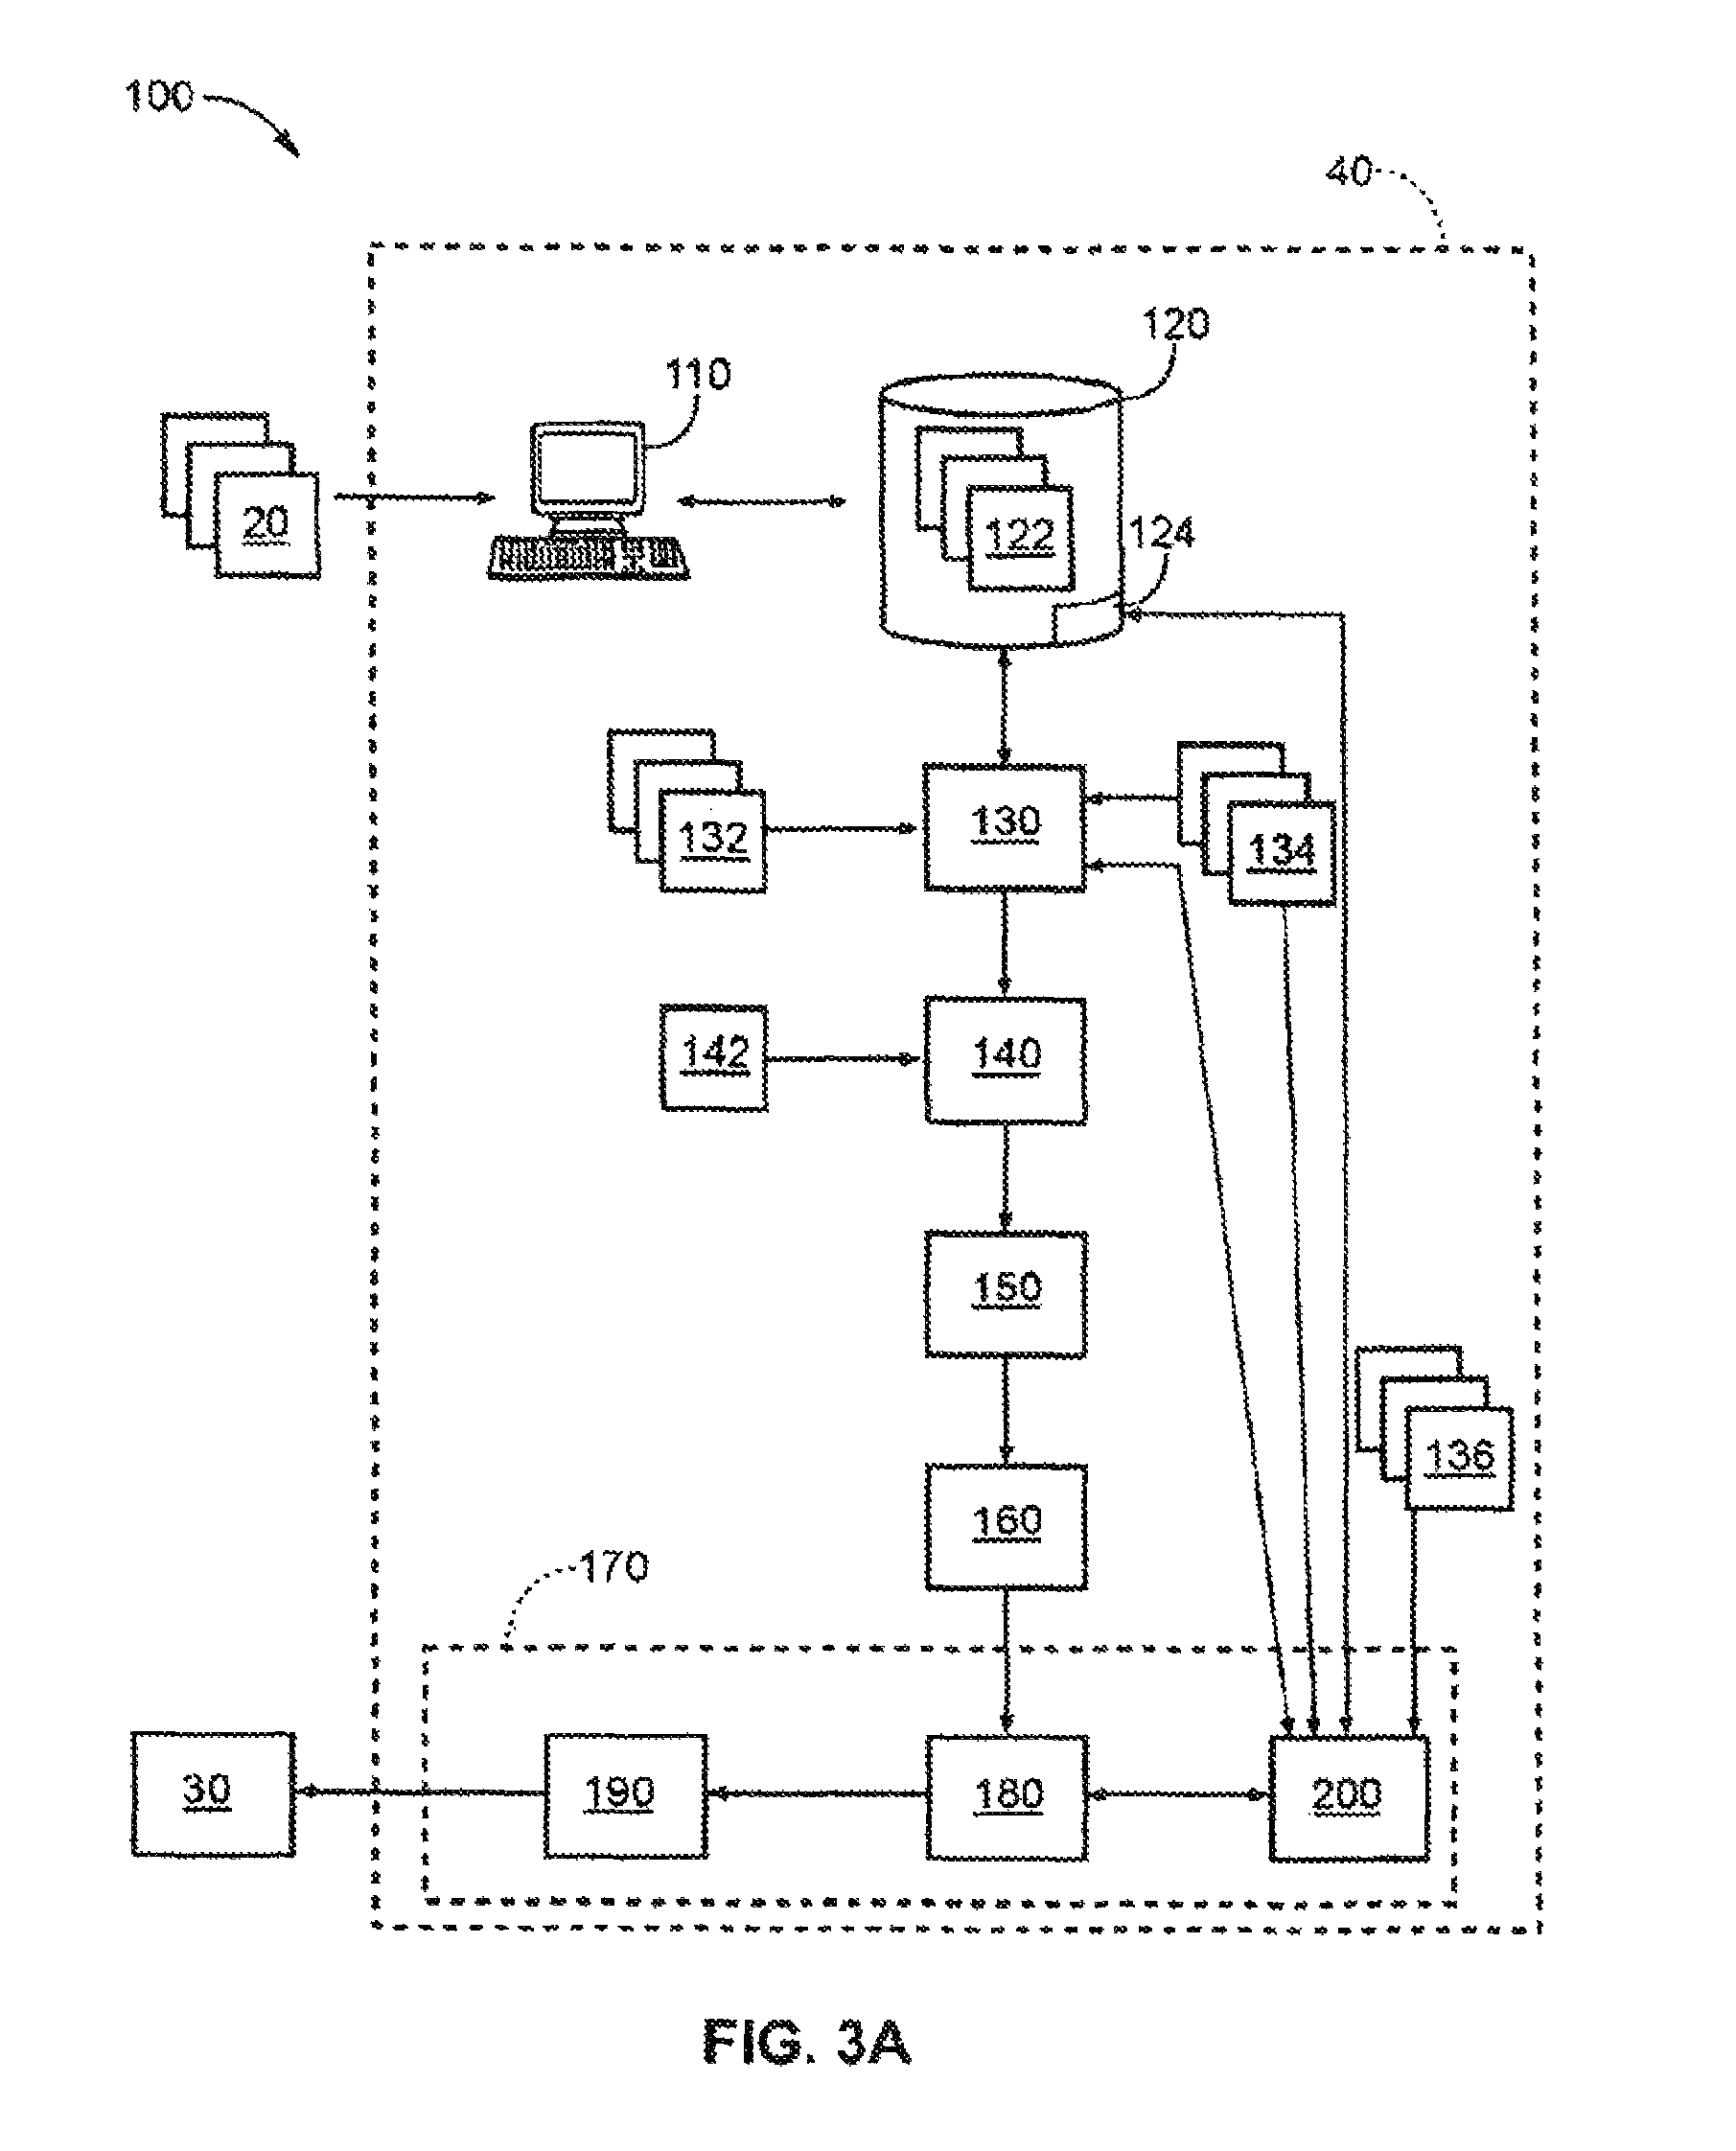 System and Architecture for Robust Management of Resources in a Wide-Area Network